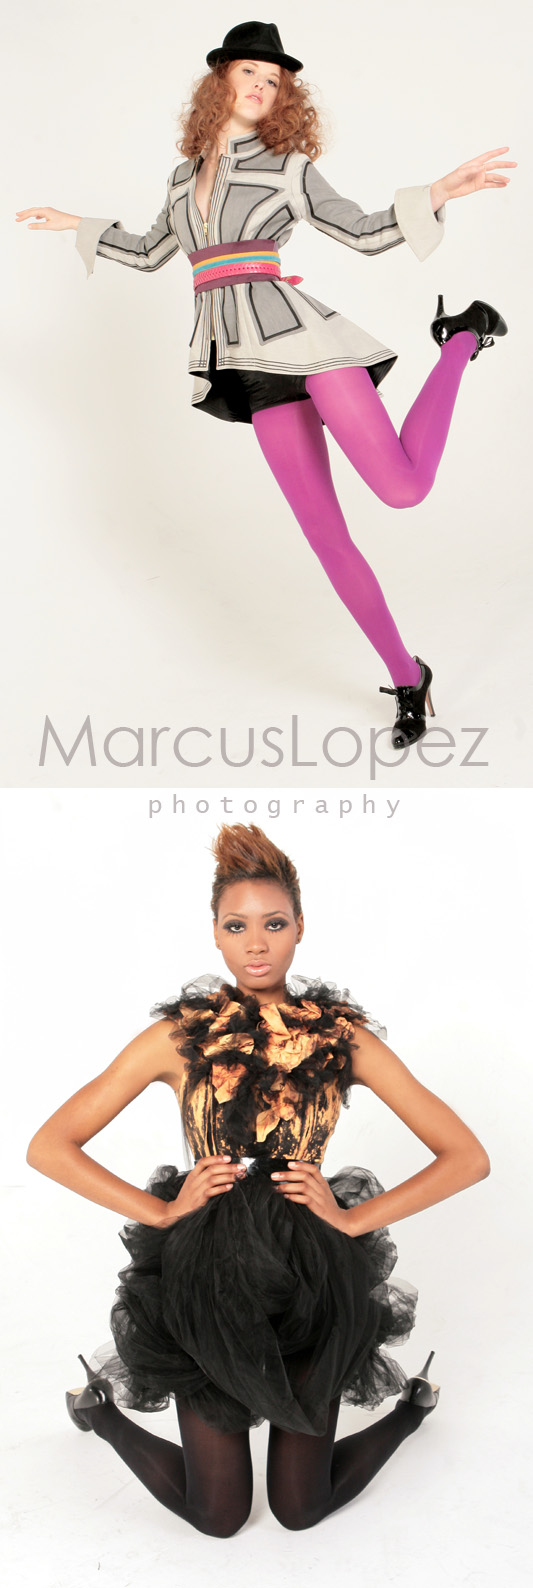 Male and Female model photo shoot of MarcusLopez photography, Ariel Elysse and Meica B in Dallas, hair styled by Hair Design by Tai, wardrobe styled by Nha Khanh , makeup by Makeup By Shazia , clothing designed by Lalah the stylist